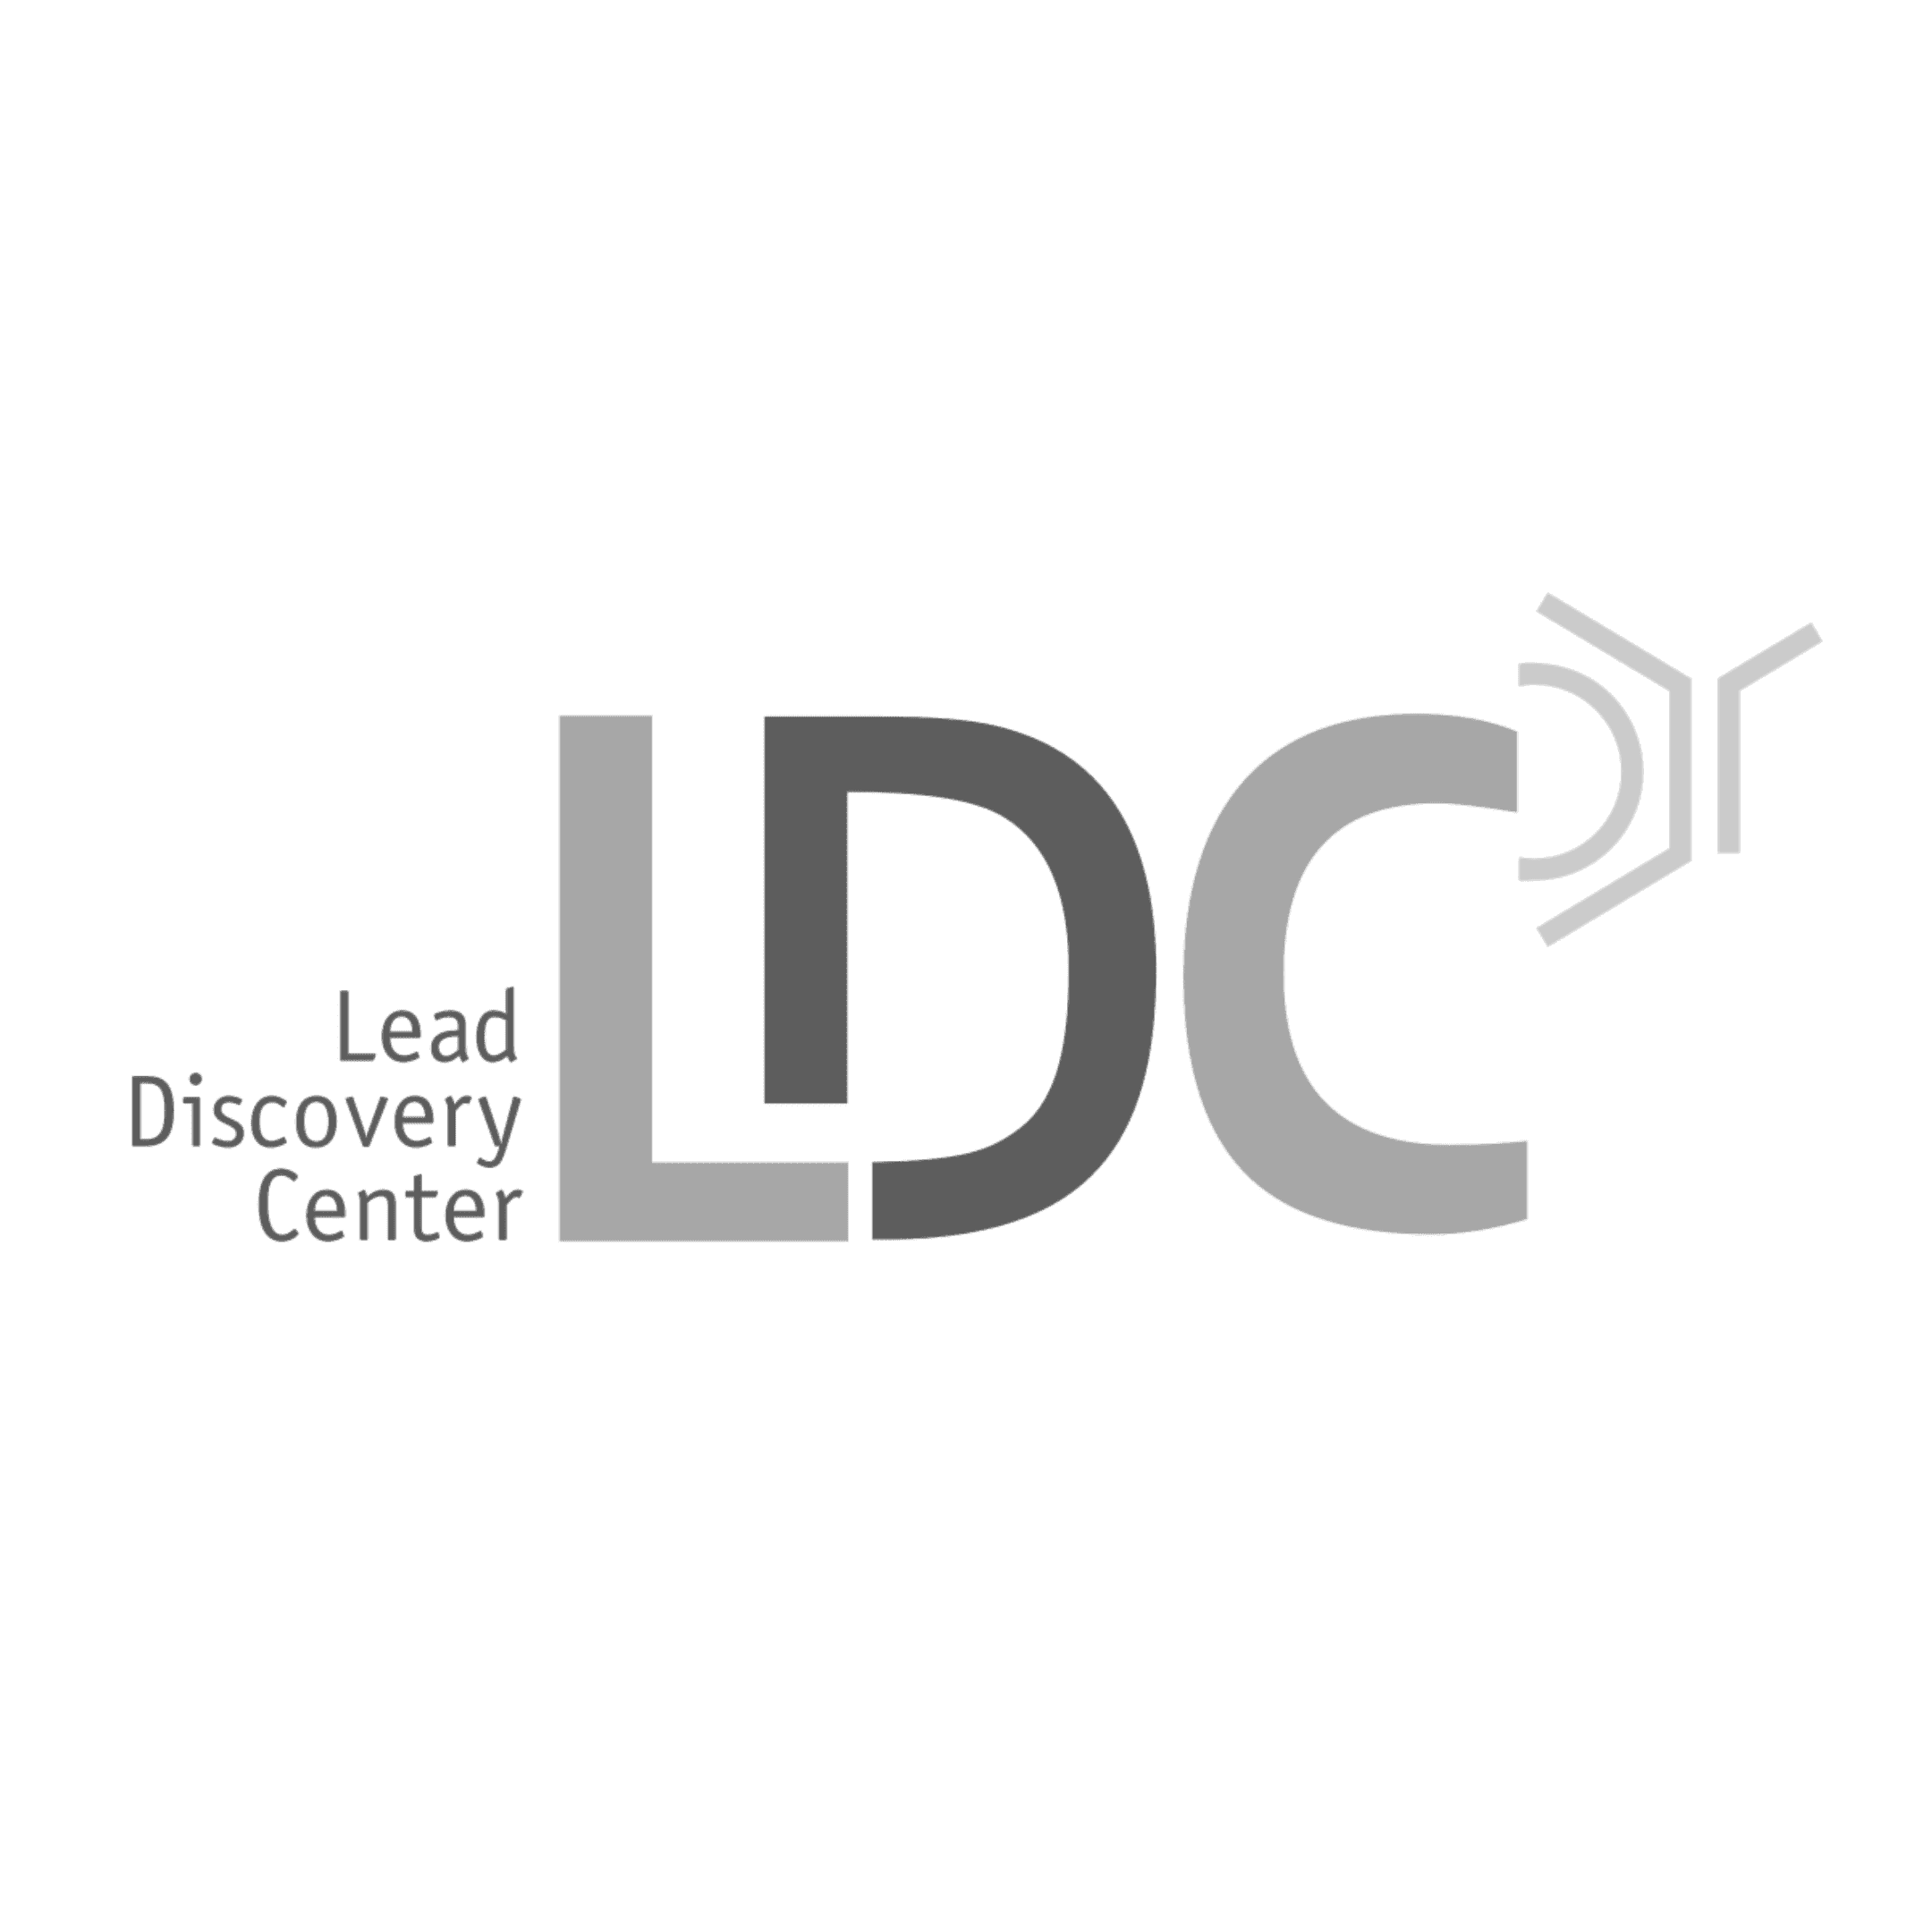 Lead Discovery Center Logo